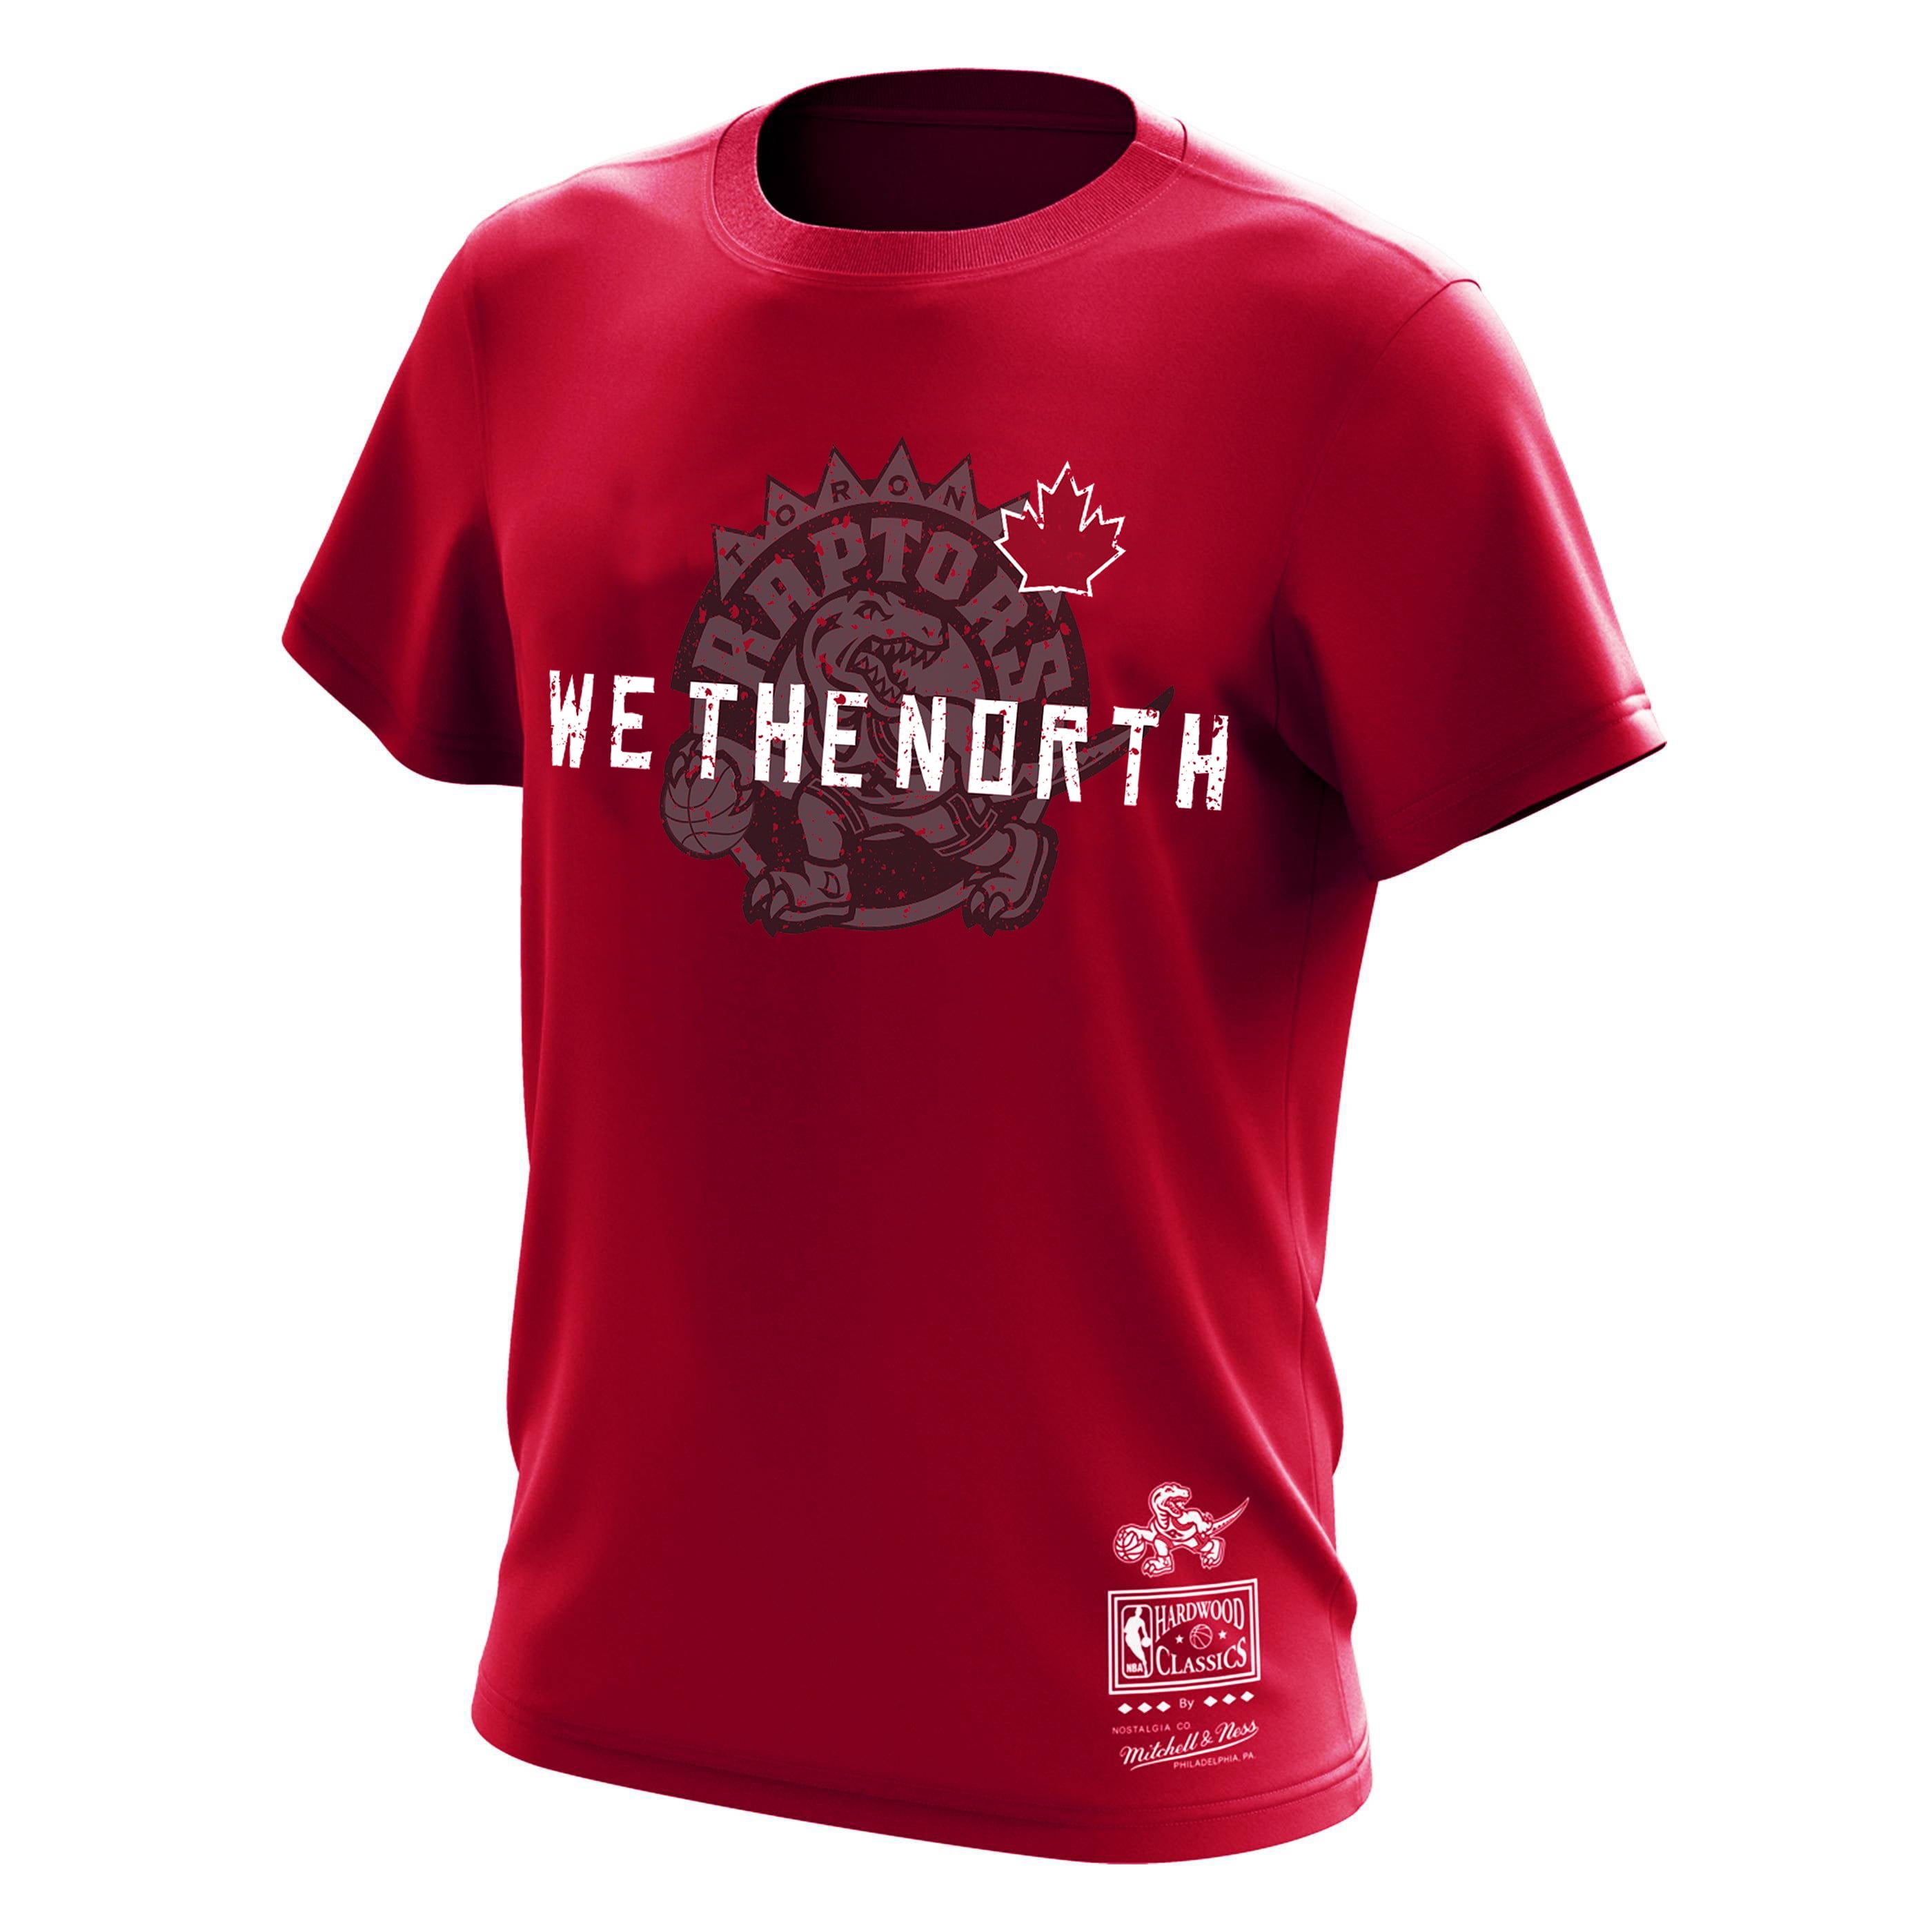 we the north red shirt